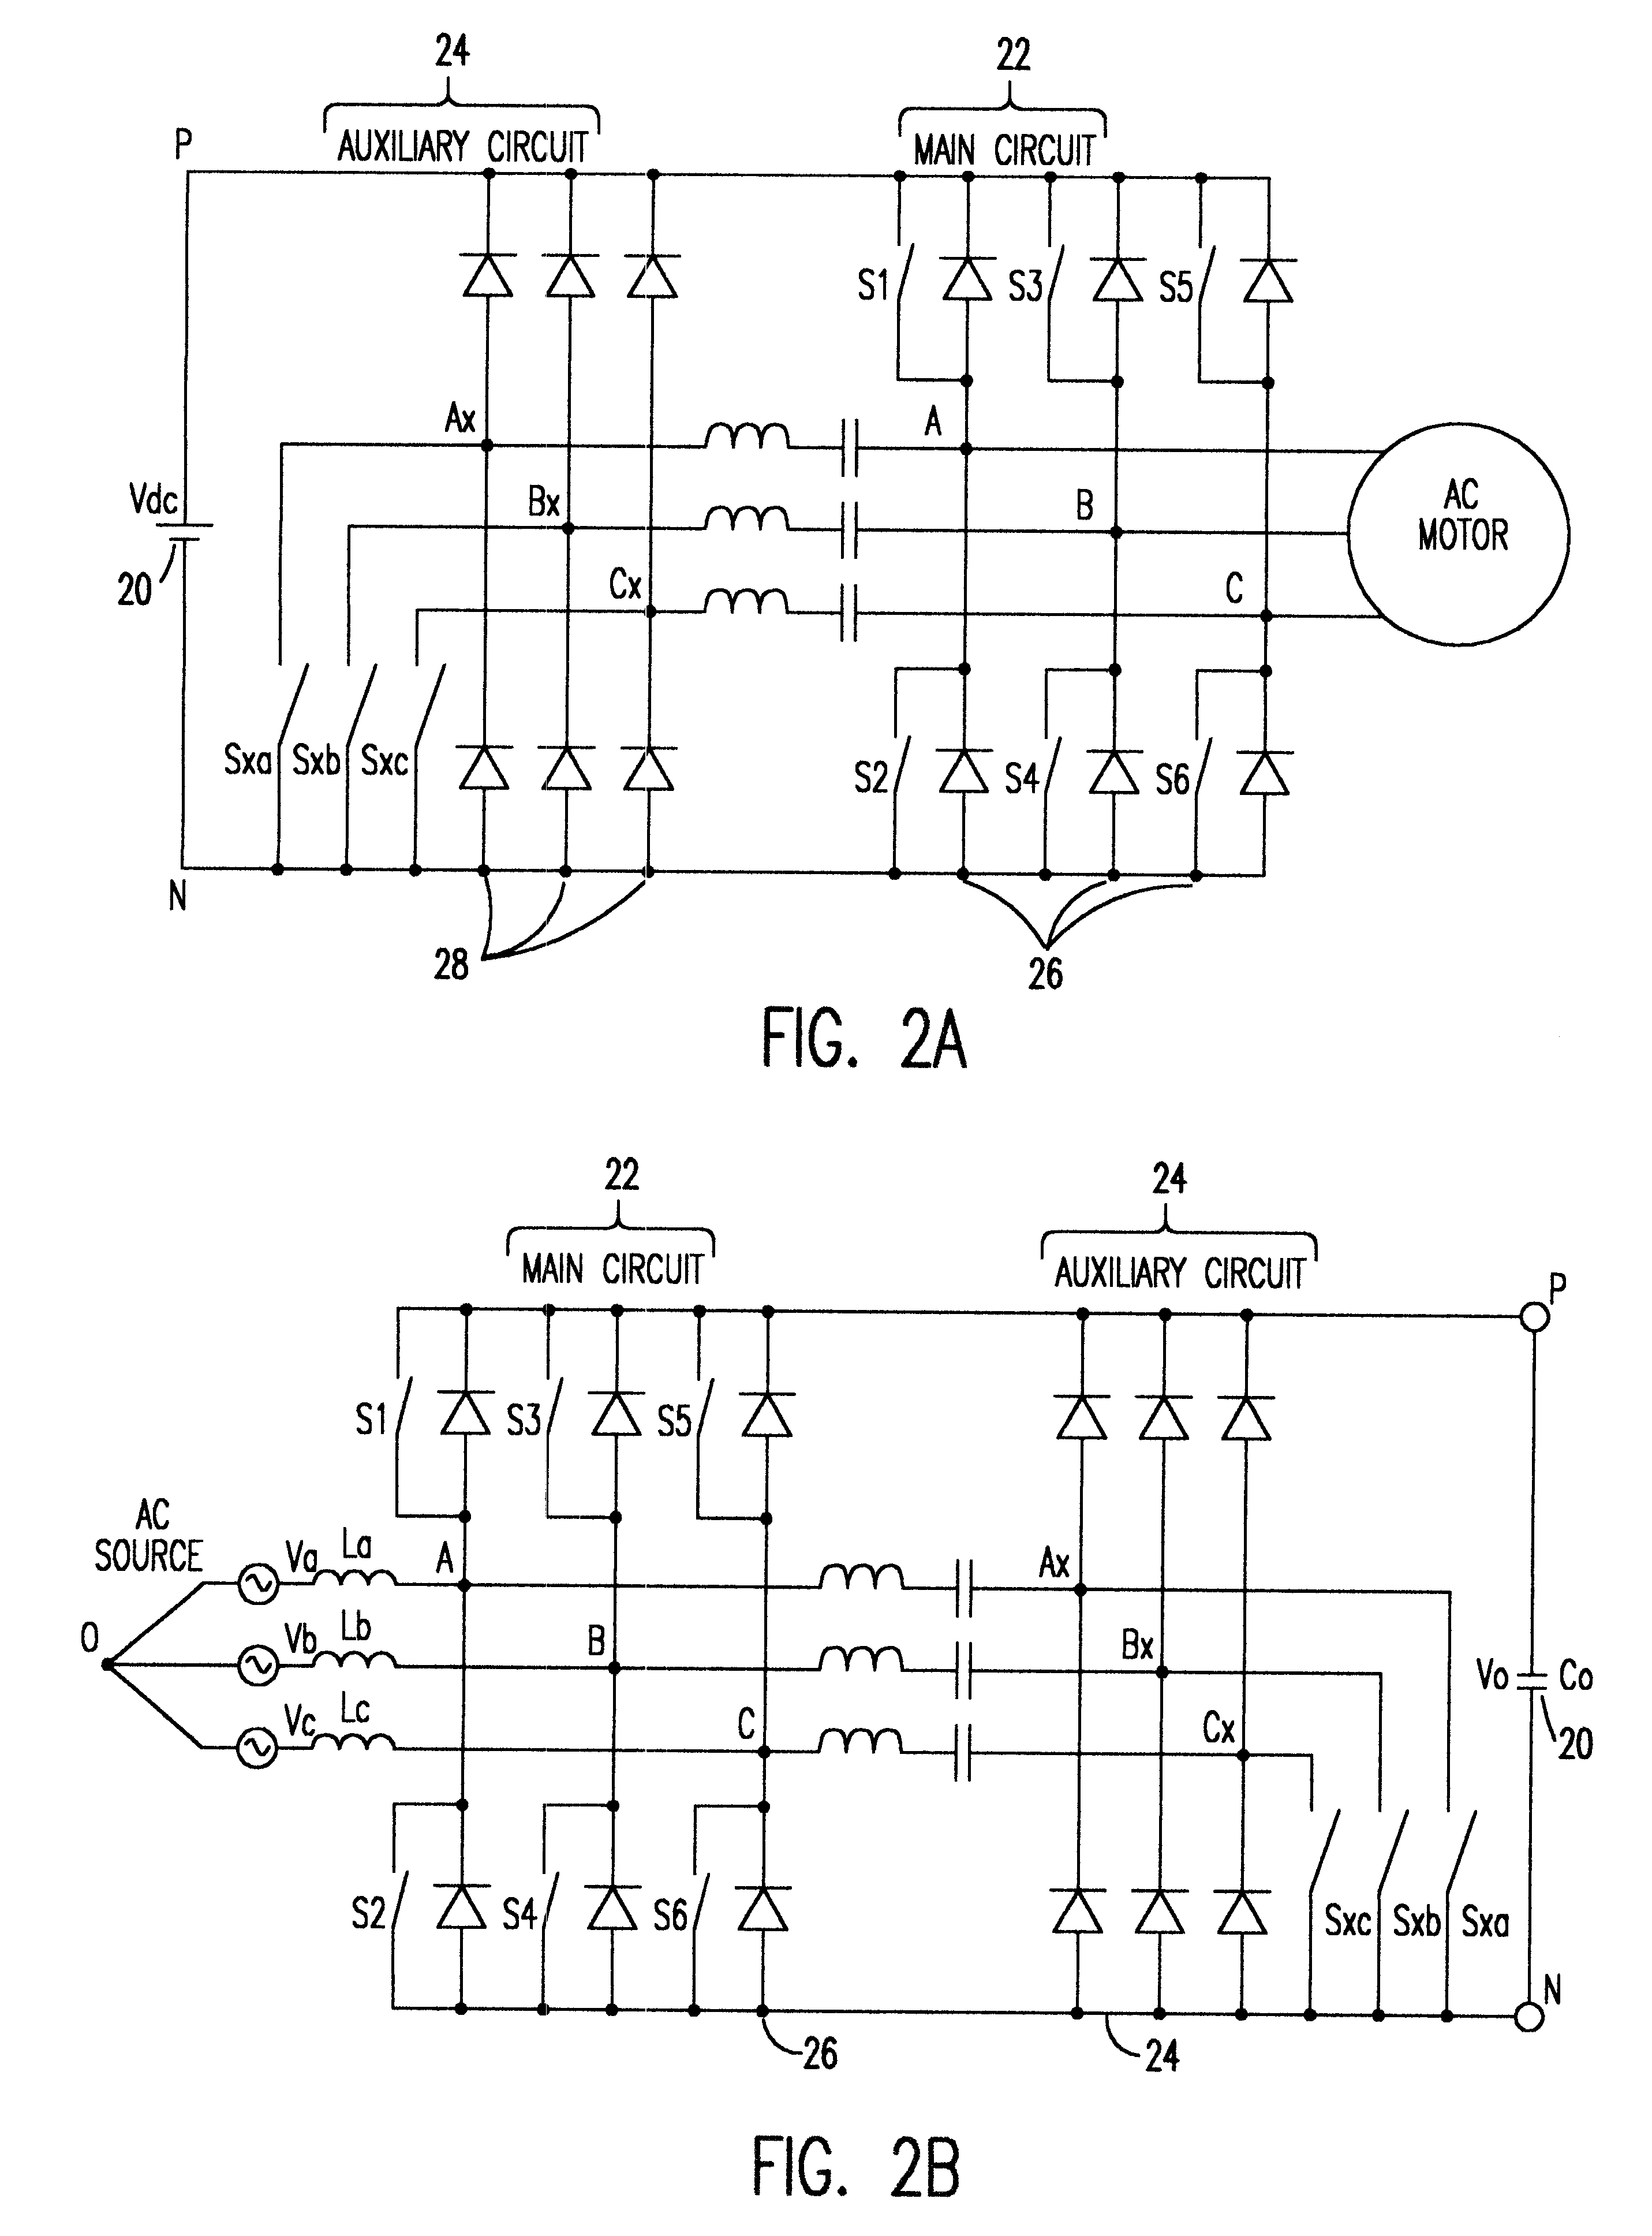 Three-phase zero-current-transition (ZCT) inverters and rectifiers with three auxiliary switches